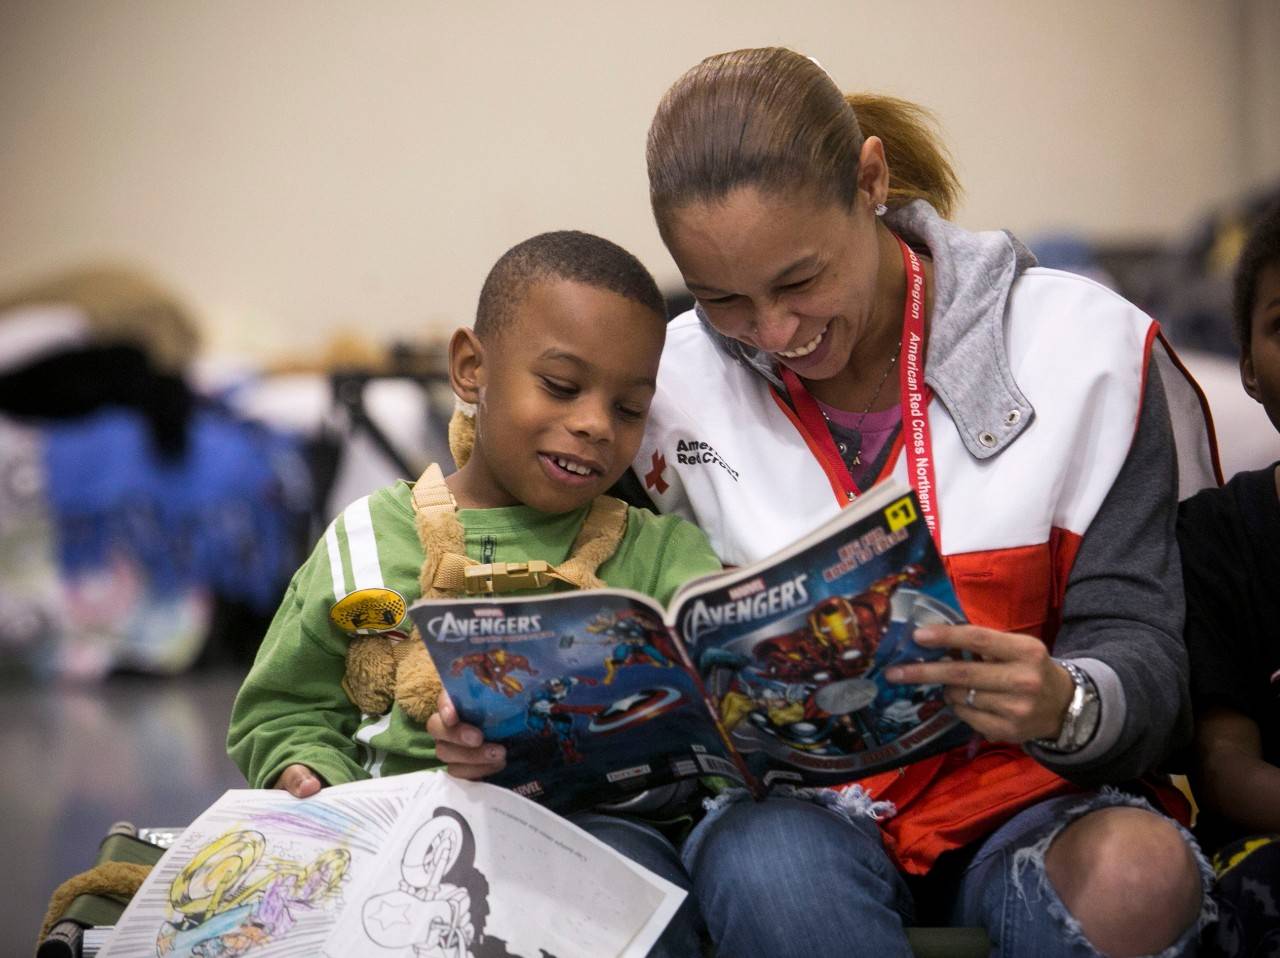 January 3, 2016 -- Garland, Texas -- Red Cross shelter at the Gale Fields Recreation Center.  Red Cross volunteer Misty Manglona reads to Jeremiah Moore. Photos by Dennis Drenner for the American Red Cross. , Woman reading to boy in shelter